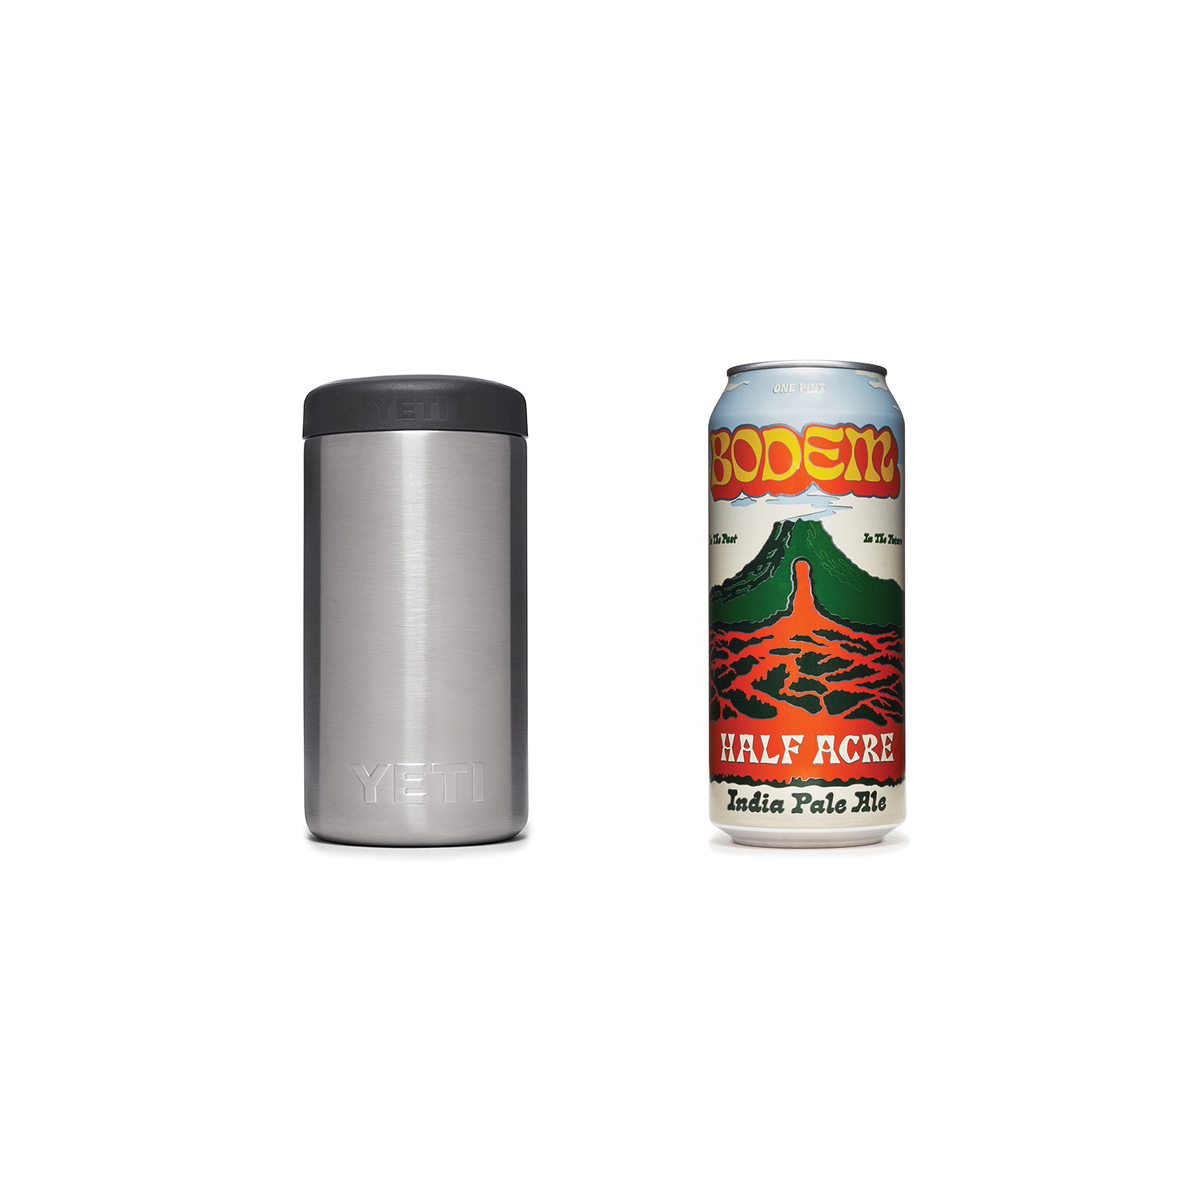 YETI Rambler 21070090037 Colster Can Insulator, 2-3/4 in Dia x 6-1/8 in H, 12 oz Can/Bottle, Stainless Steel - 4